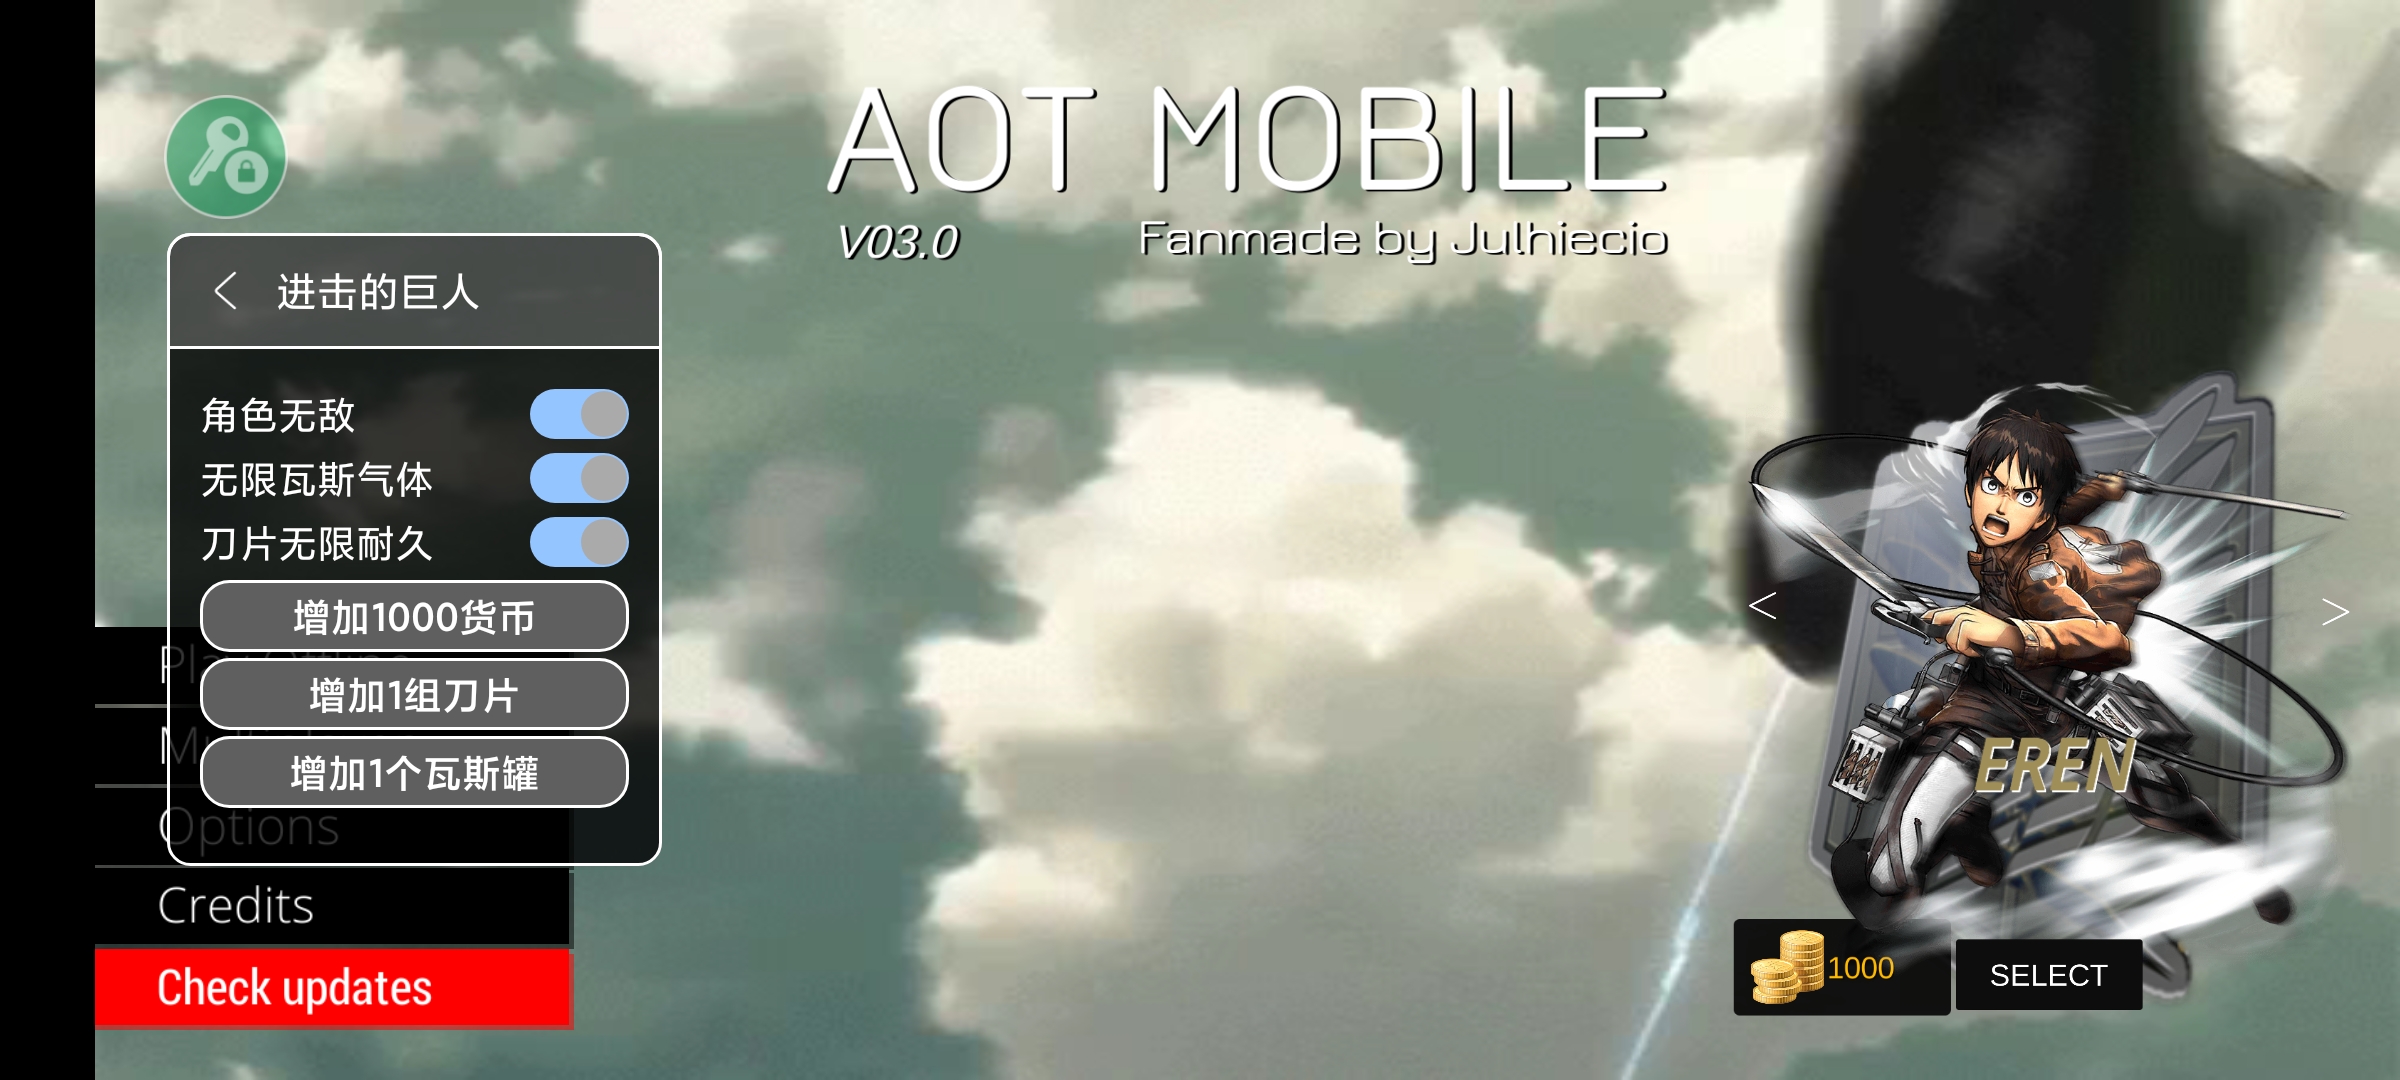 AOT MOBILE FANGAME V03.0 By Julhiecioƽv3.0 Ѱ